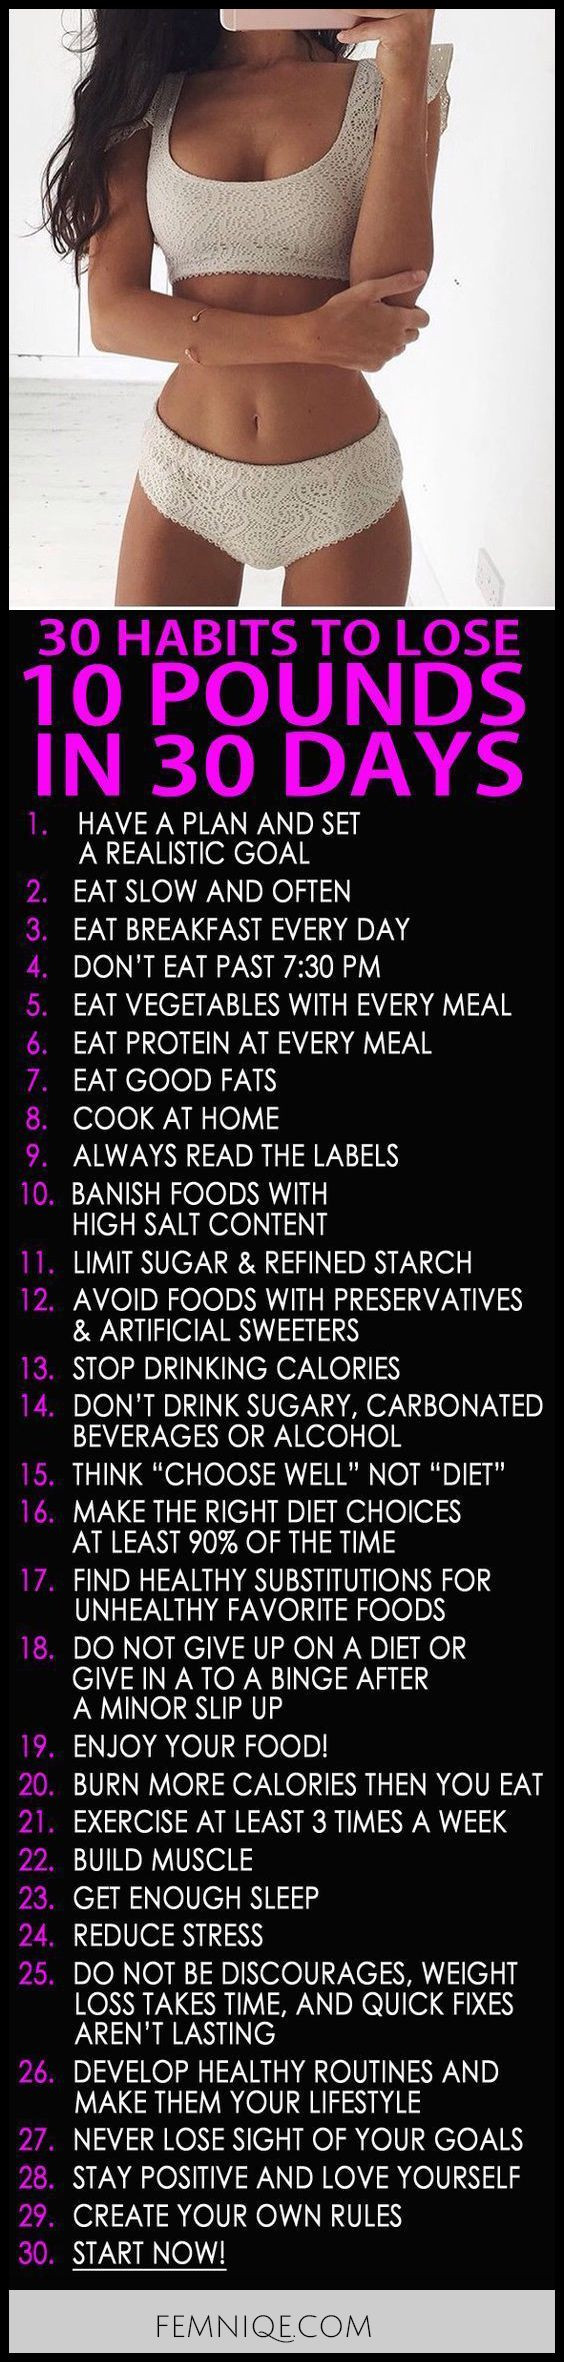 How To Lose Weight In 2 Weeks
 10 Steps to Shedding 10 Pounds in 2 weeks Instructions